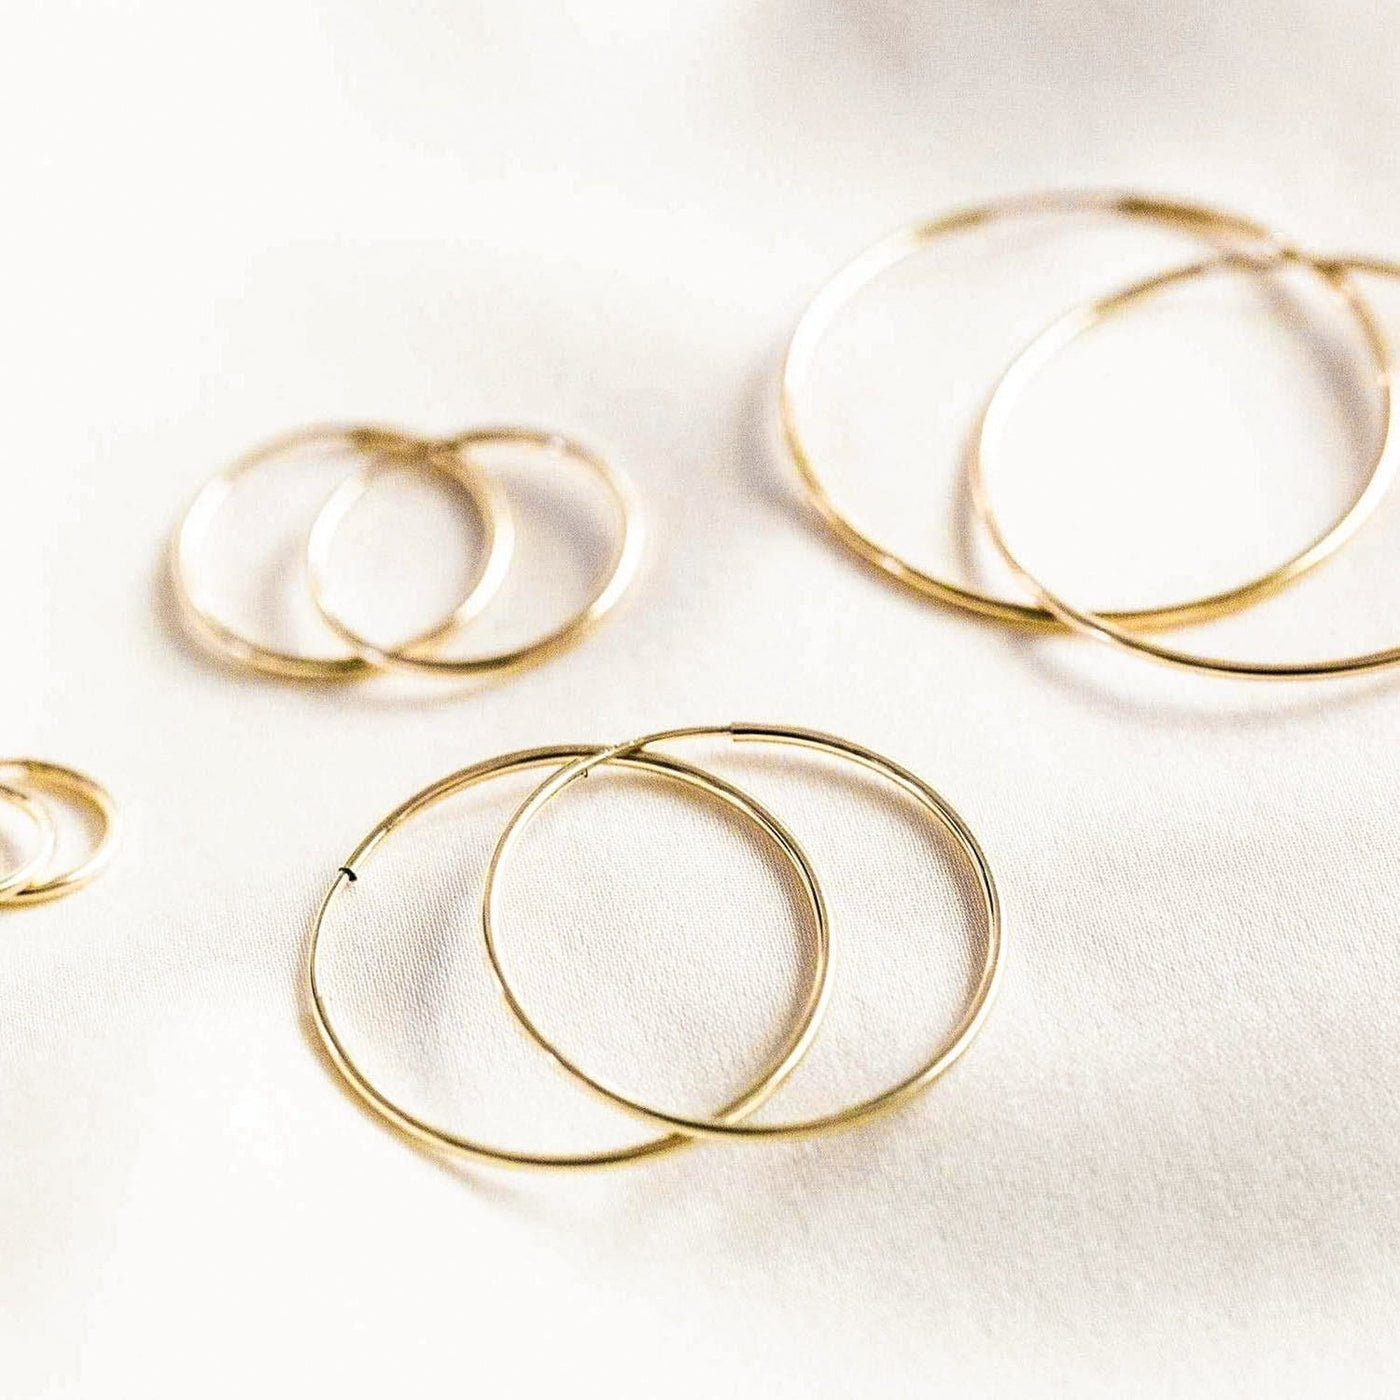 Small (14mm) Medium (20mm) Large (30mm) X-Large (38mm) 2X-Large (50mm) Thin Hoop Earrings by Simple & Dainty Jewelry